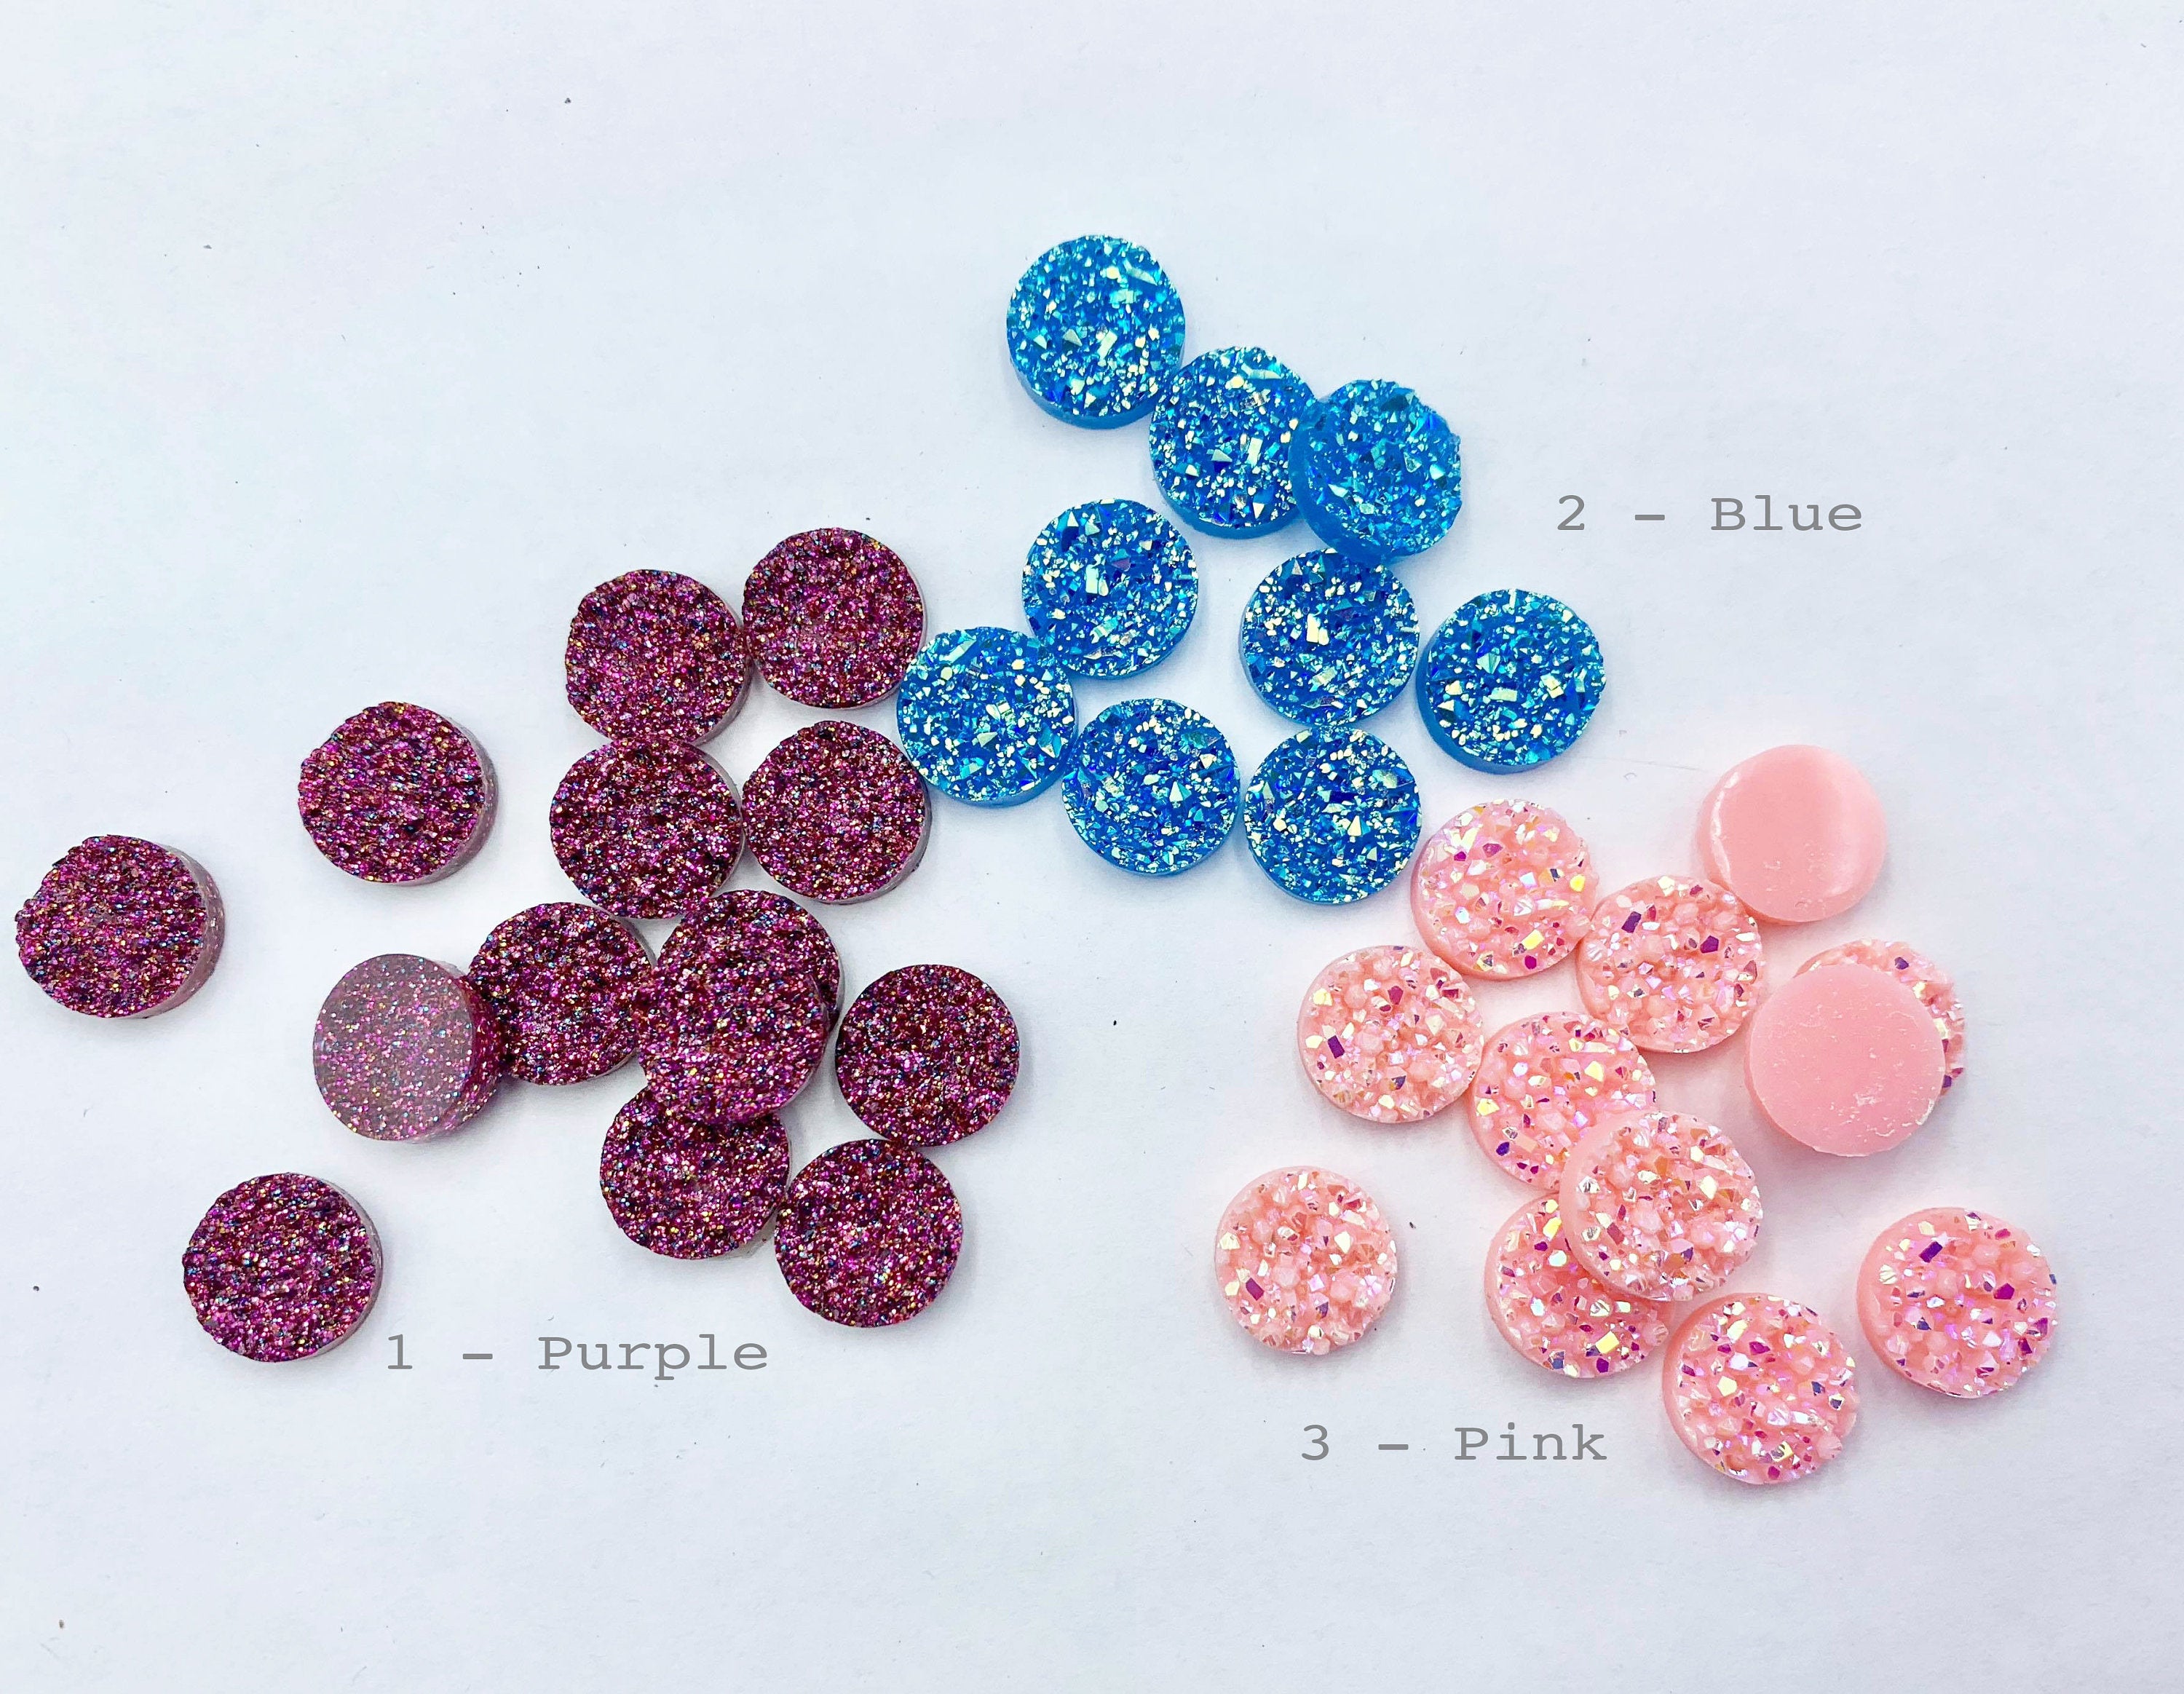 10pcs, 12mm Resin Cabochons, Flat Round, AB Color